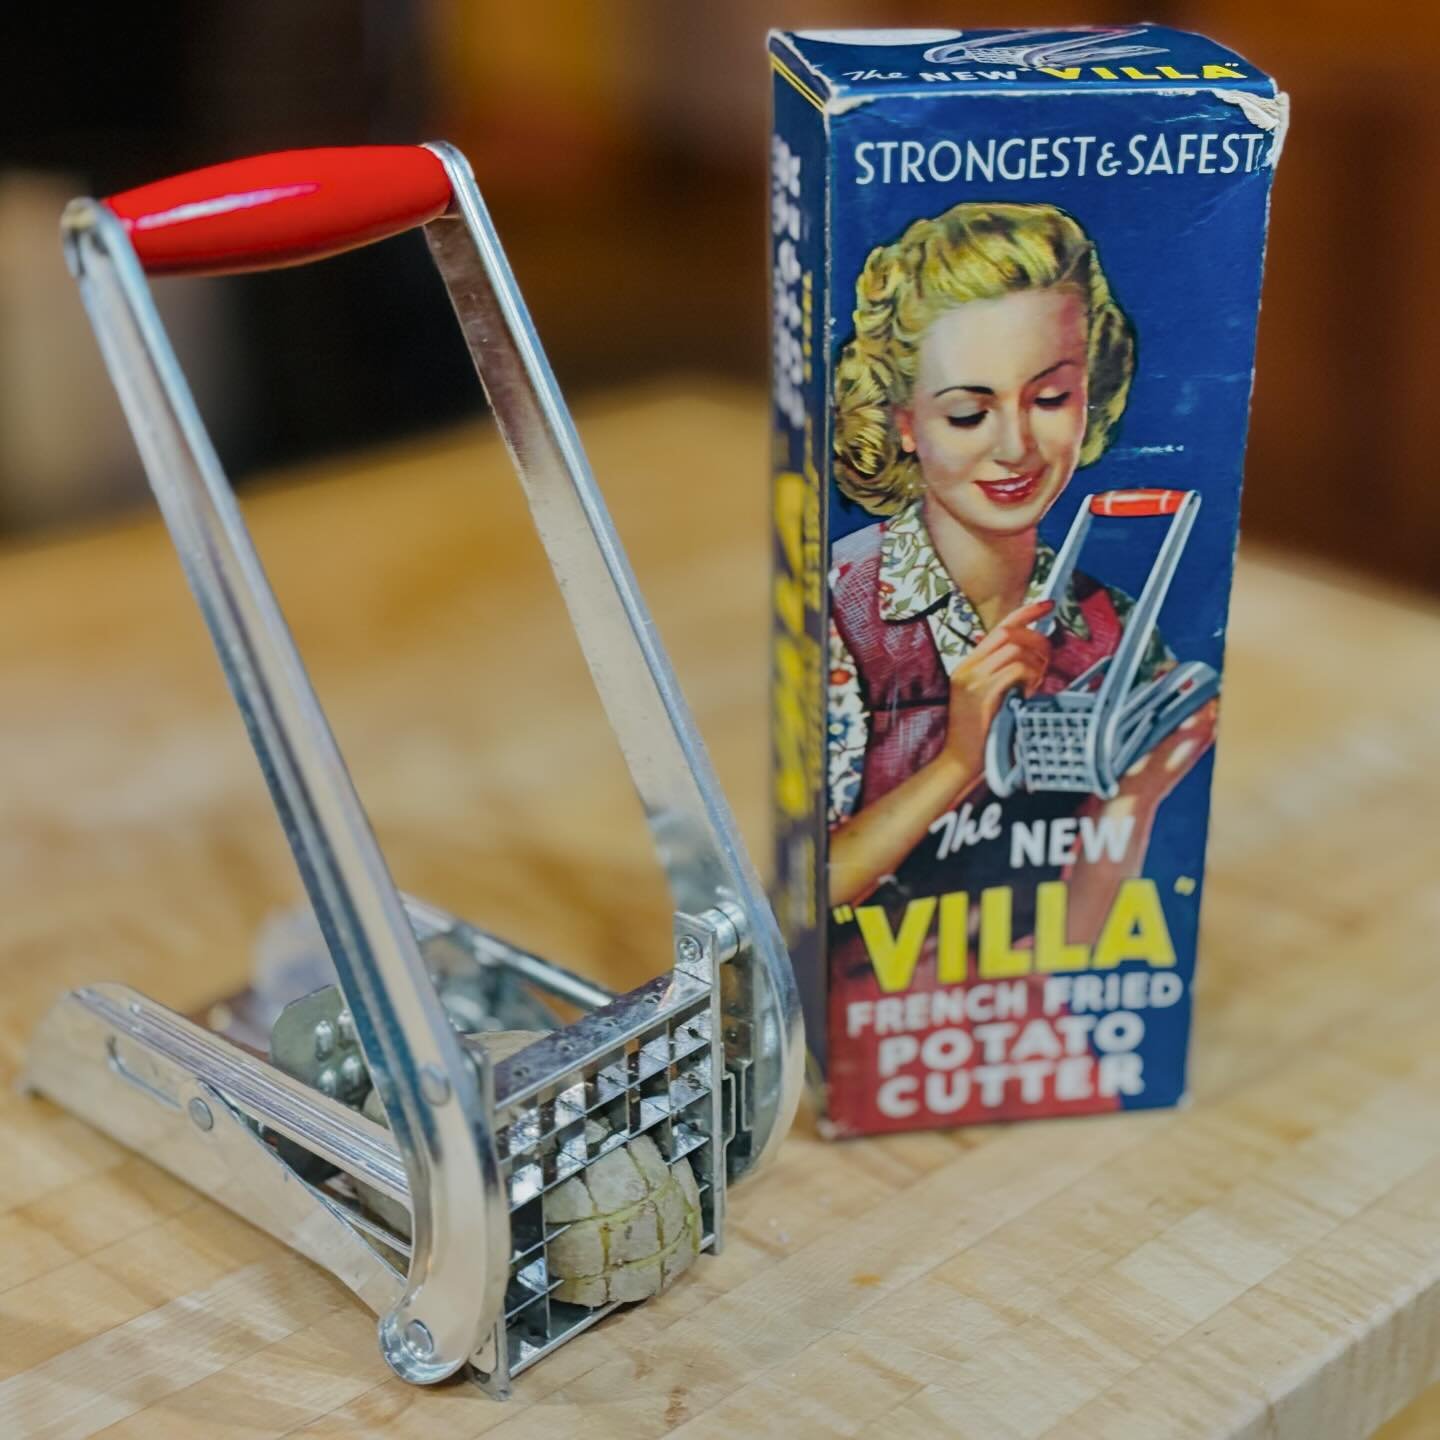 The 1950s was a transformative era in American history, marked by the rise of consumer culture. There was a shift in the design and packaging of kitchen wares and other household products that showcased the spirit of the times. It reflected the cultu